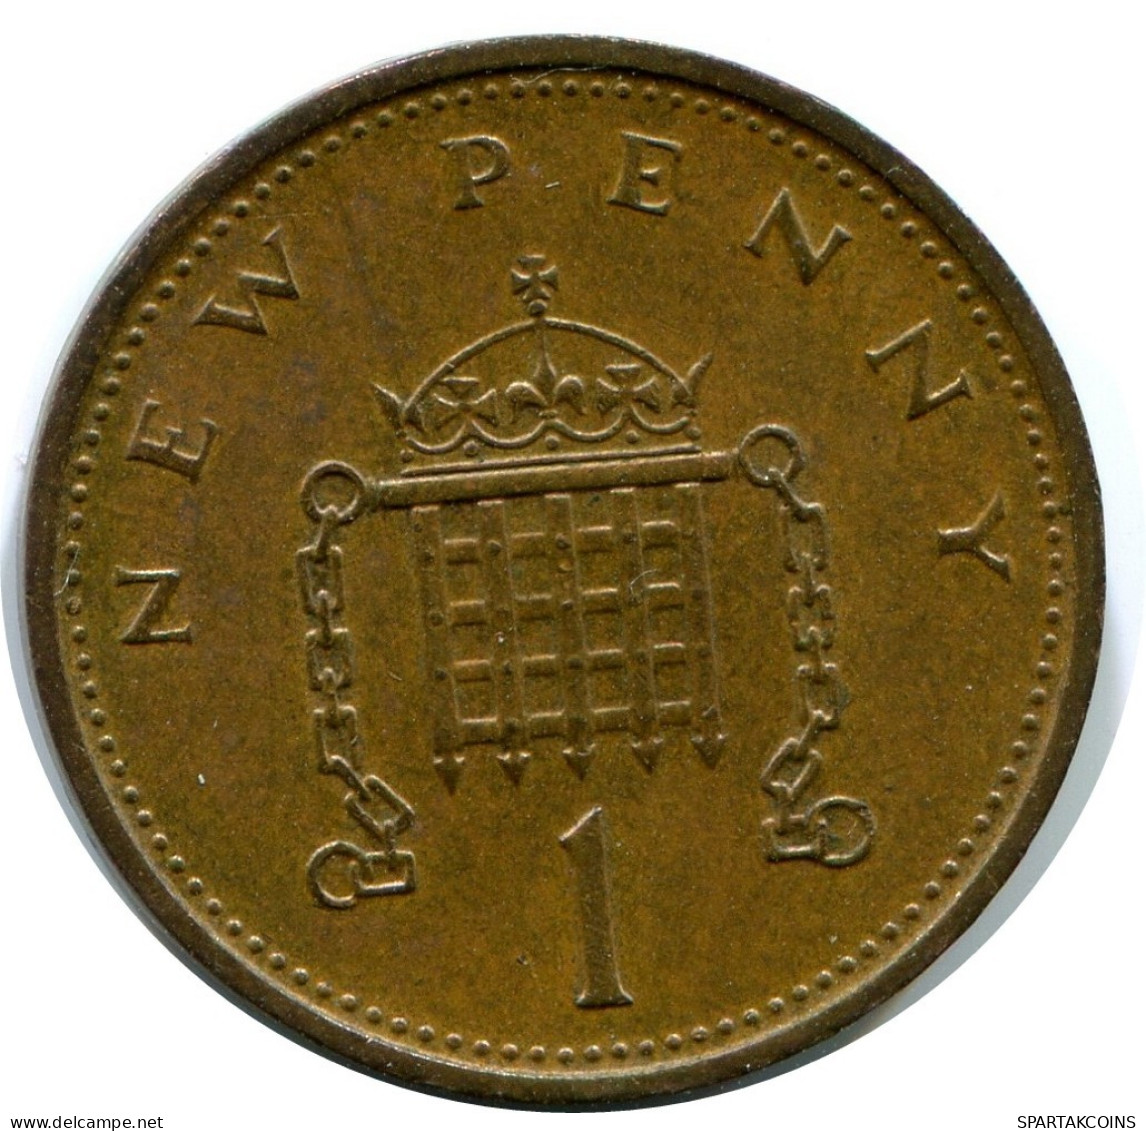 NEW PENNY 1976 UK GREAT BRITAIN Coin #AZ040.U.A - 1 Penny & 1 New Penny